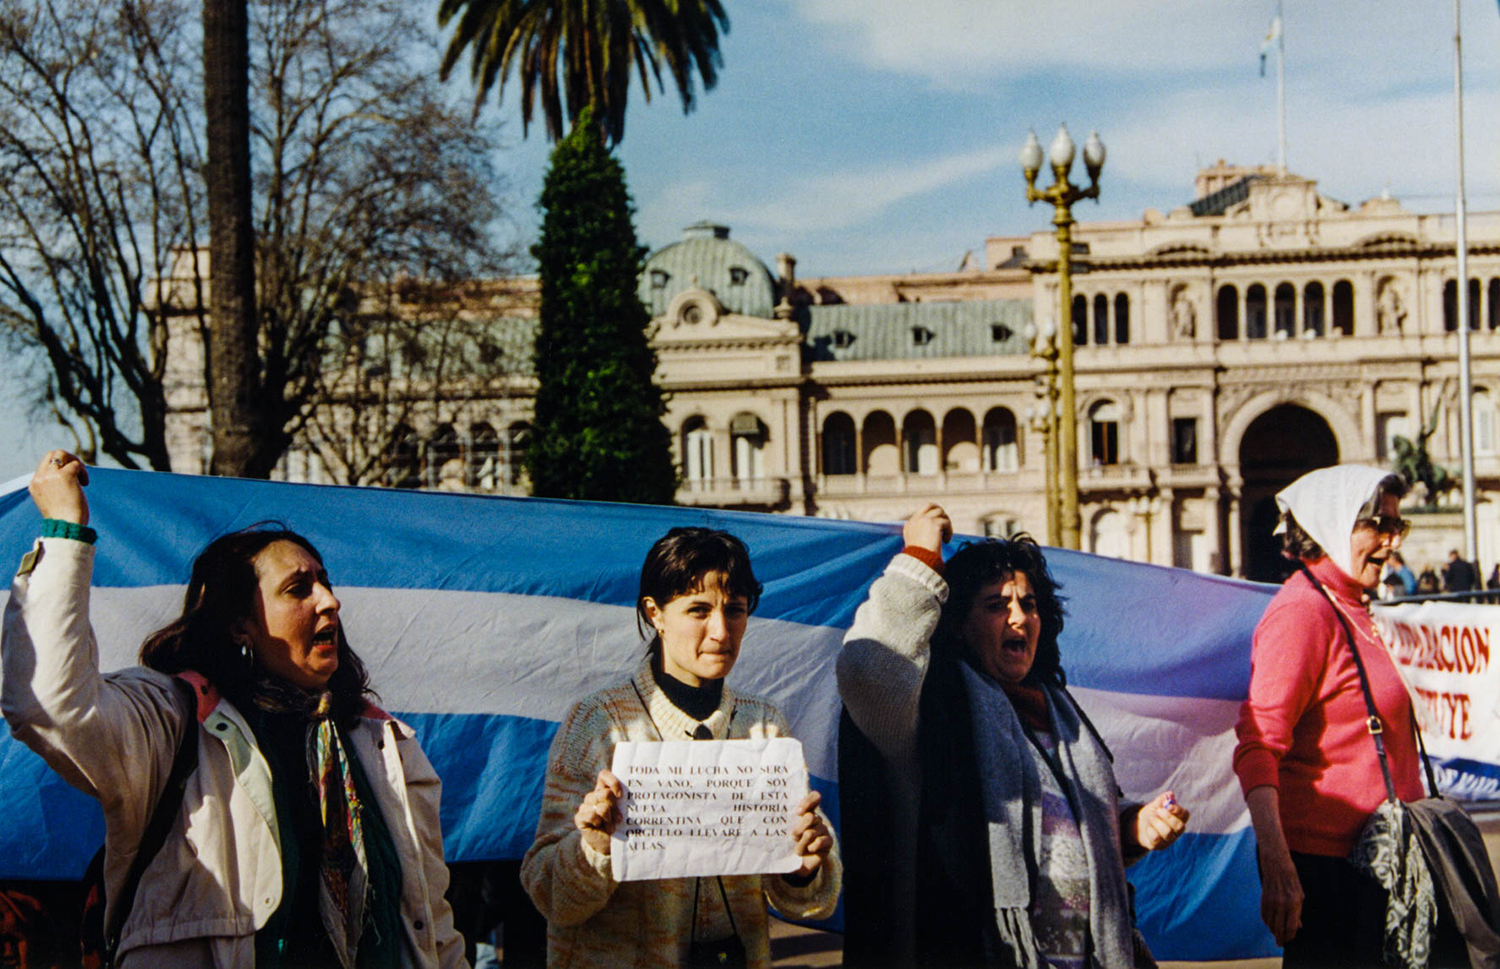 <p>Demonstrators from the province of Corrientes took their case to the presidential palace on Buenos Aires' Plaza de Mayo. They were part of broad-based civic movement spearheaded by teachers who were protesting unpaid wages, deteriorating quality of life, and corruption concerns in their provincial government in 1999 – in many ways precursors to the broader meltdown that ravaged Argentina in 2001.</p><p>Her sign reads, 'My struggle will not be in vain, as I am a part of this new history of Corrientes, which I will proudly bring to the classrooms'.</p>